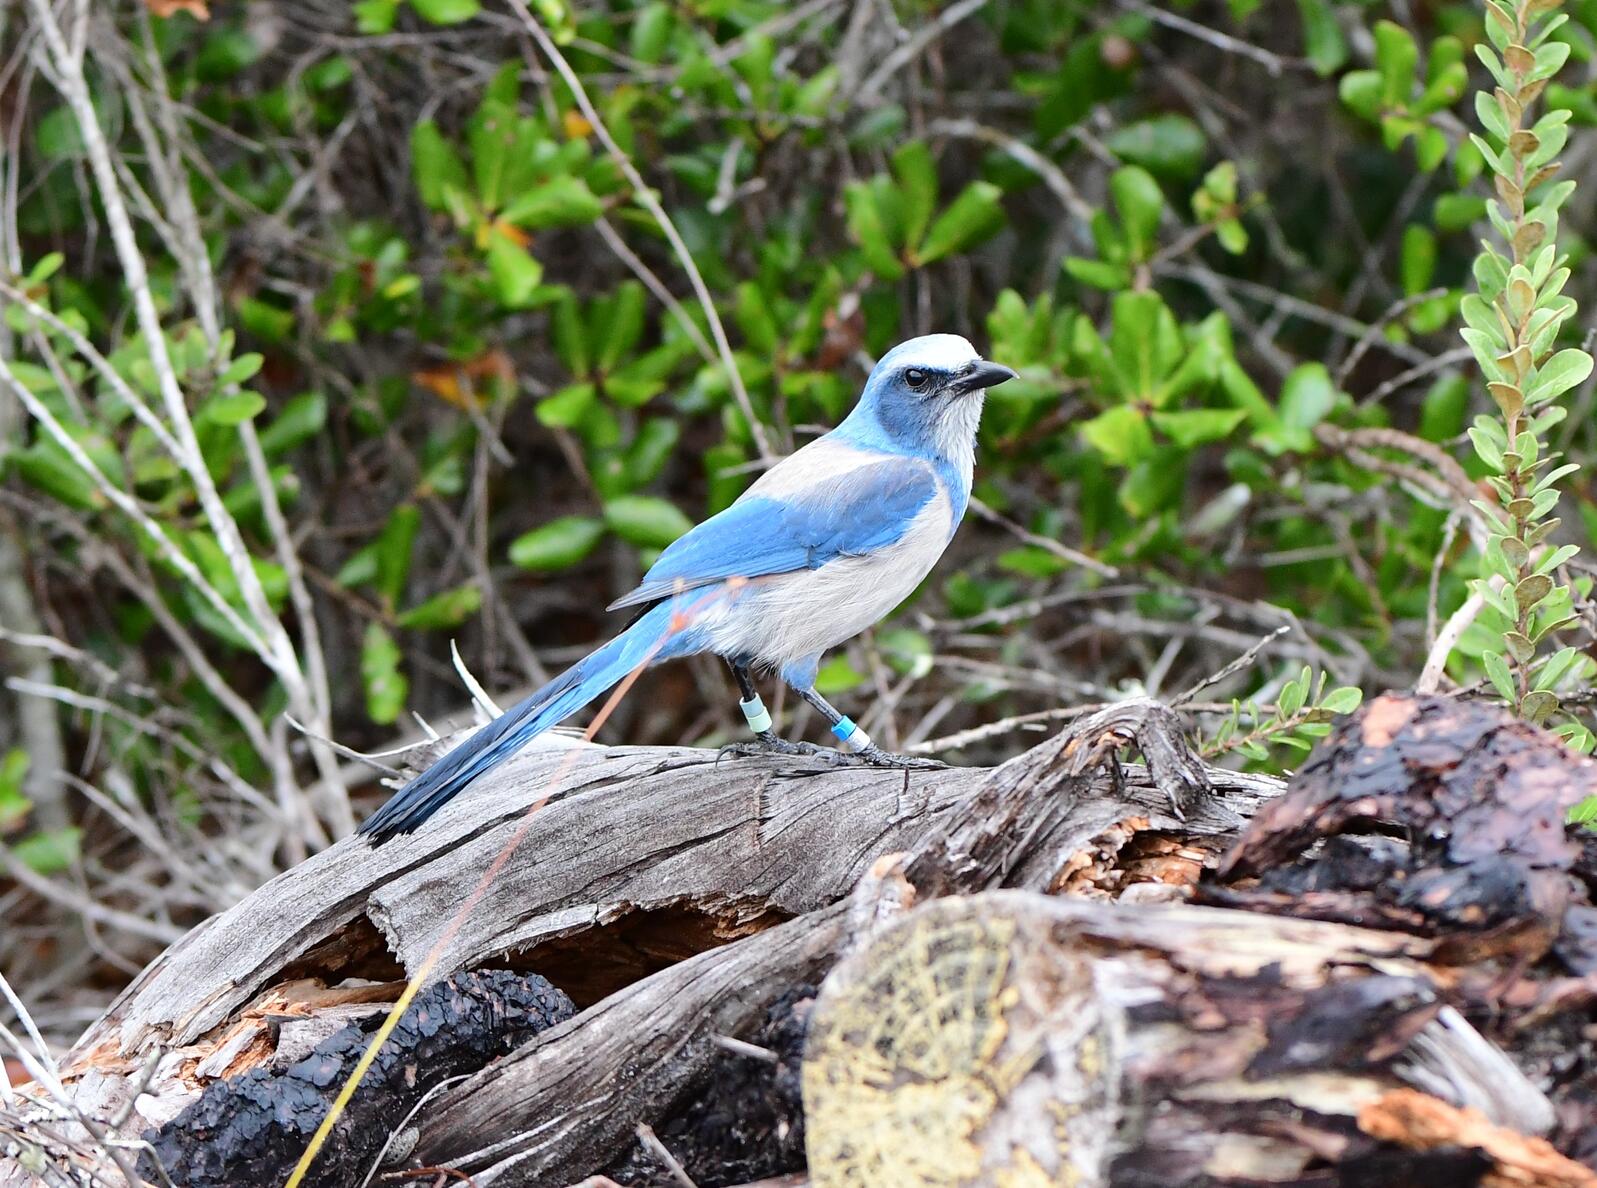 Florida Scrub-Jay sitting on a stump, with leaves in the background.